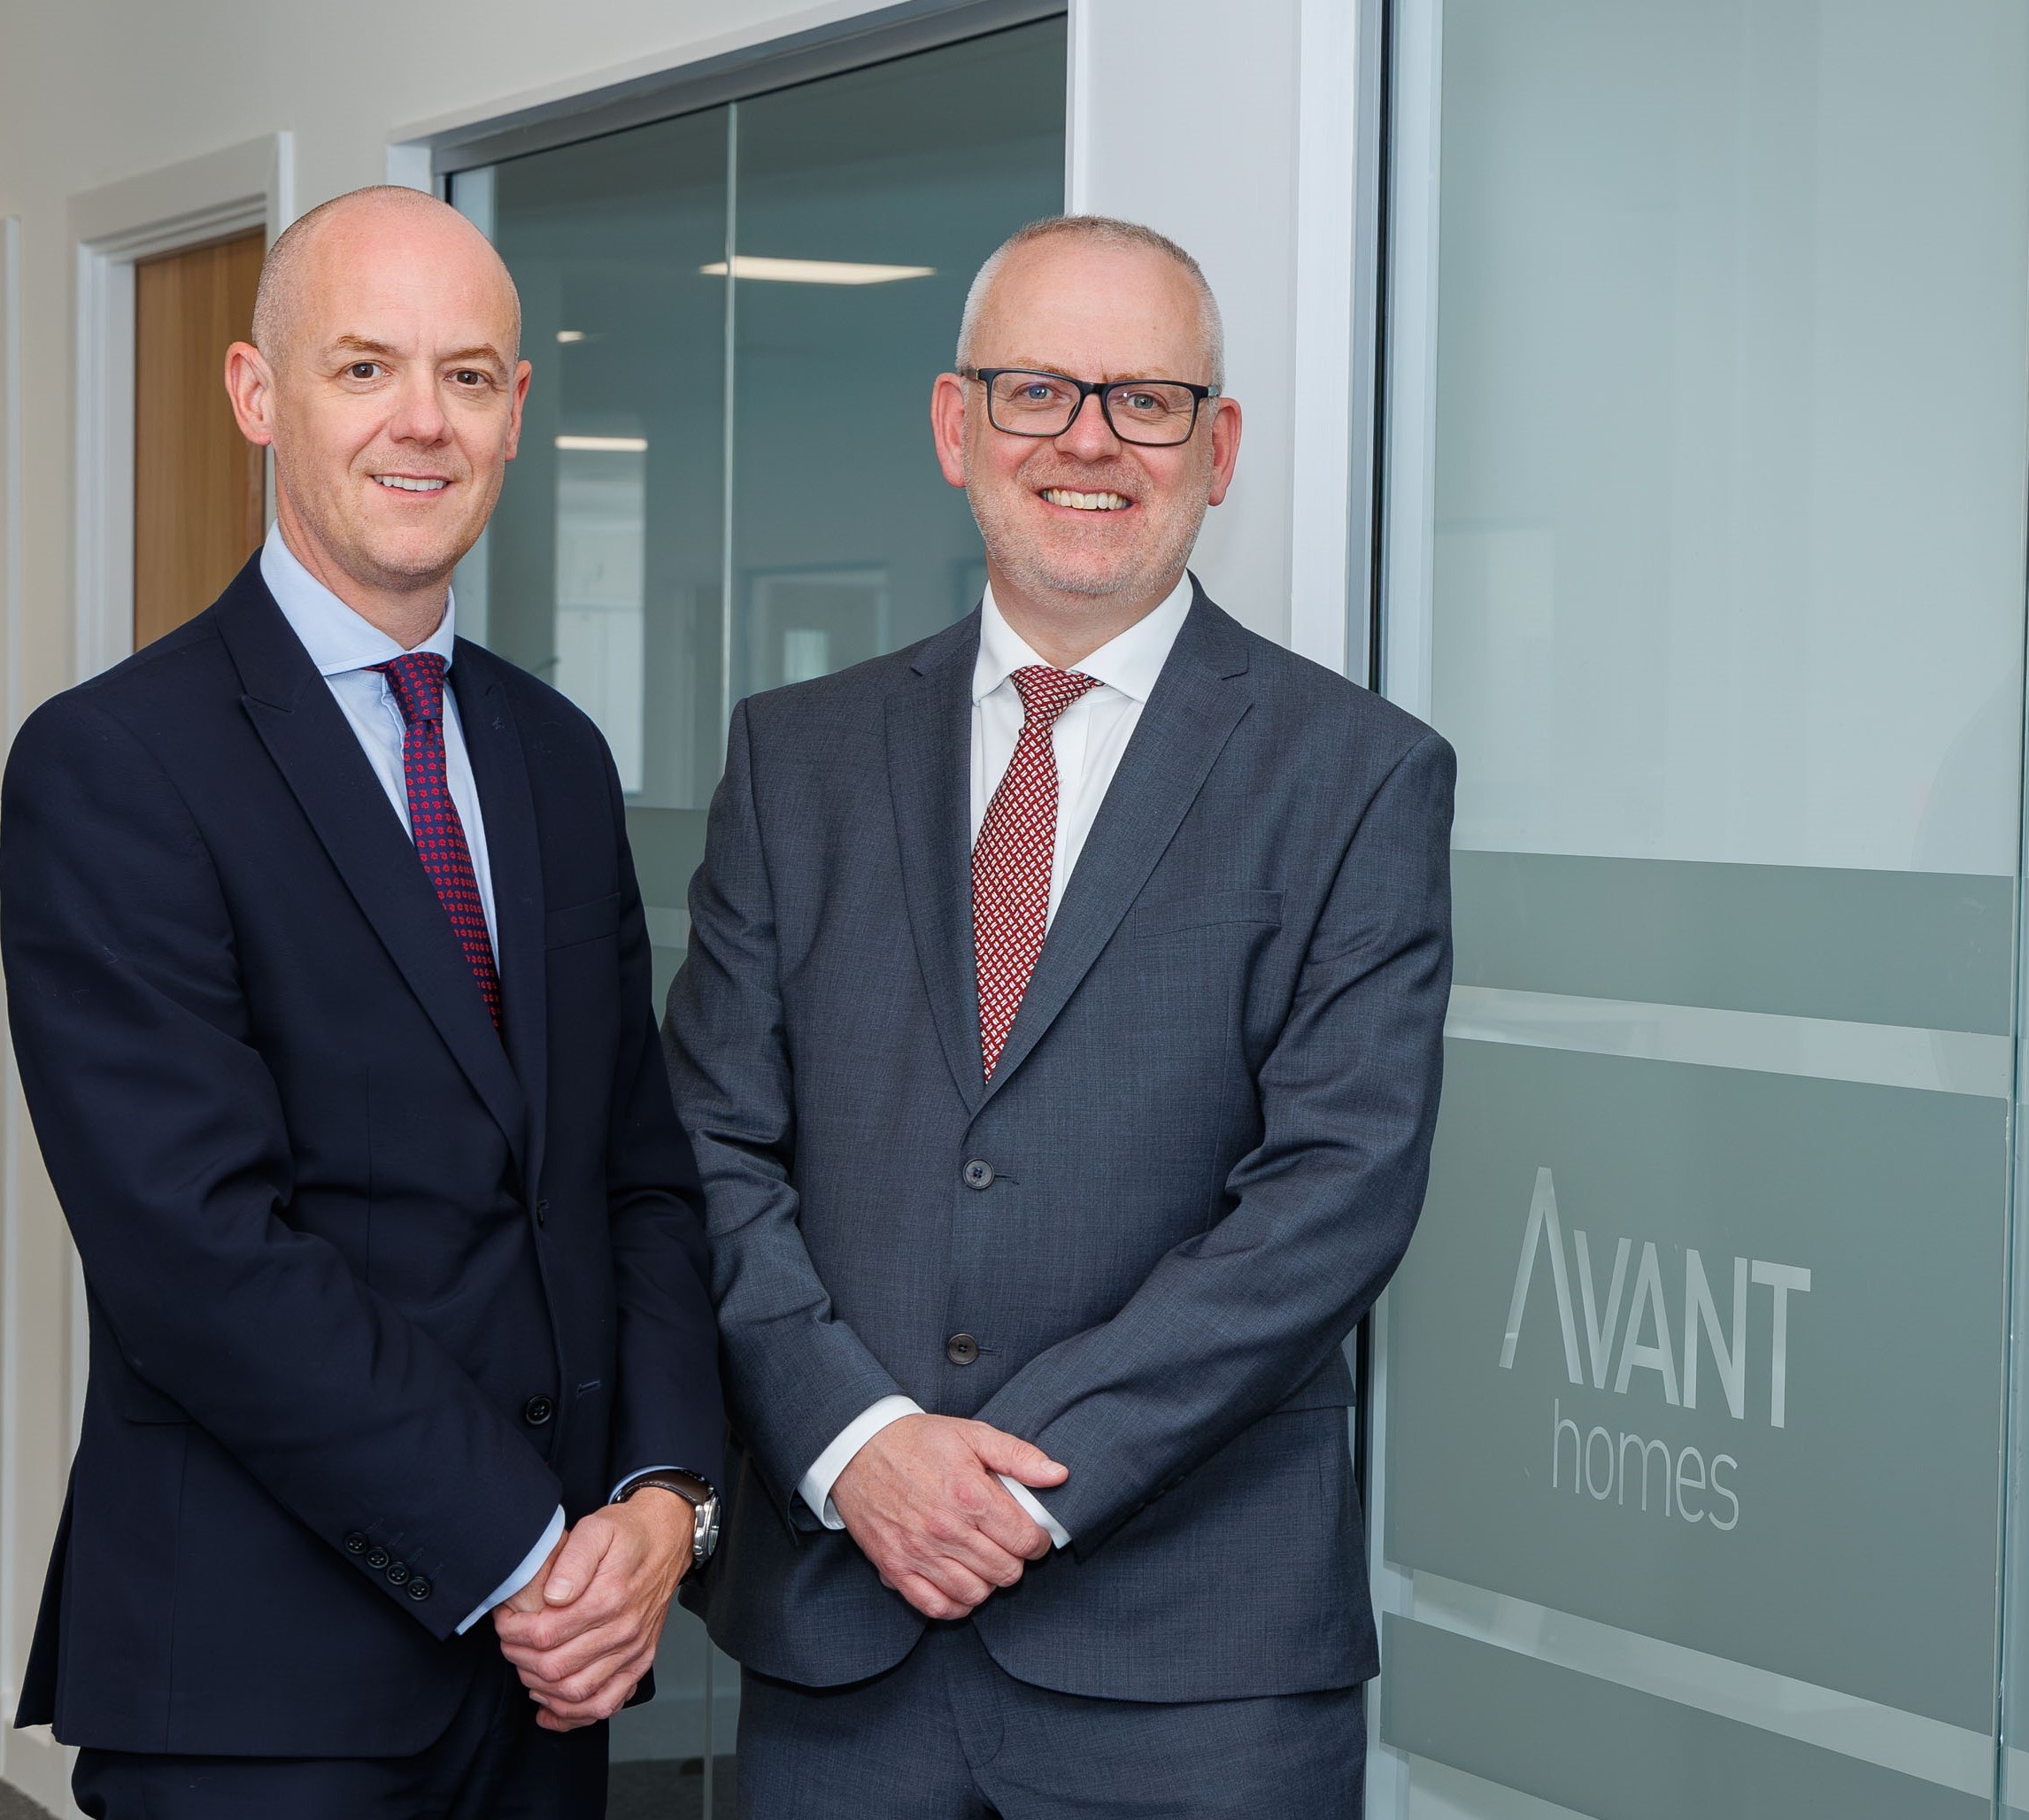 Avant Homes launches East Scotland region and relocates West Scotland business